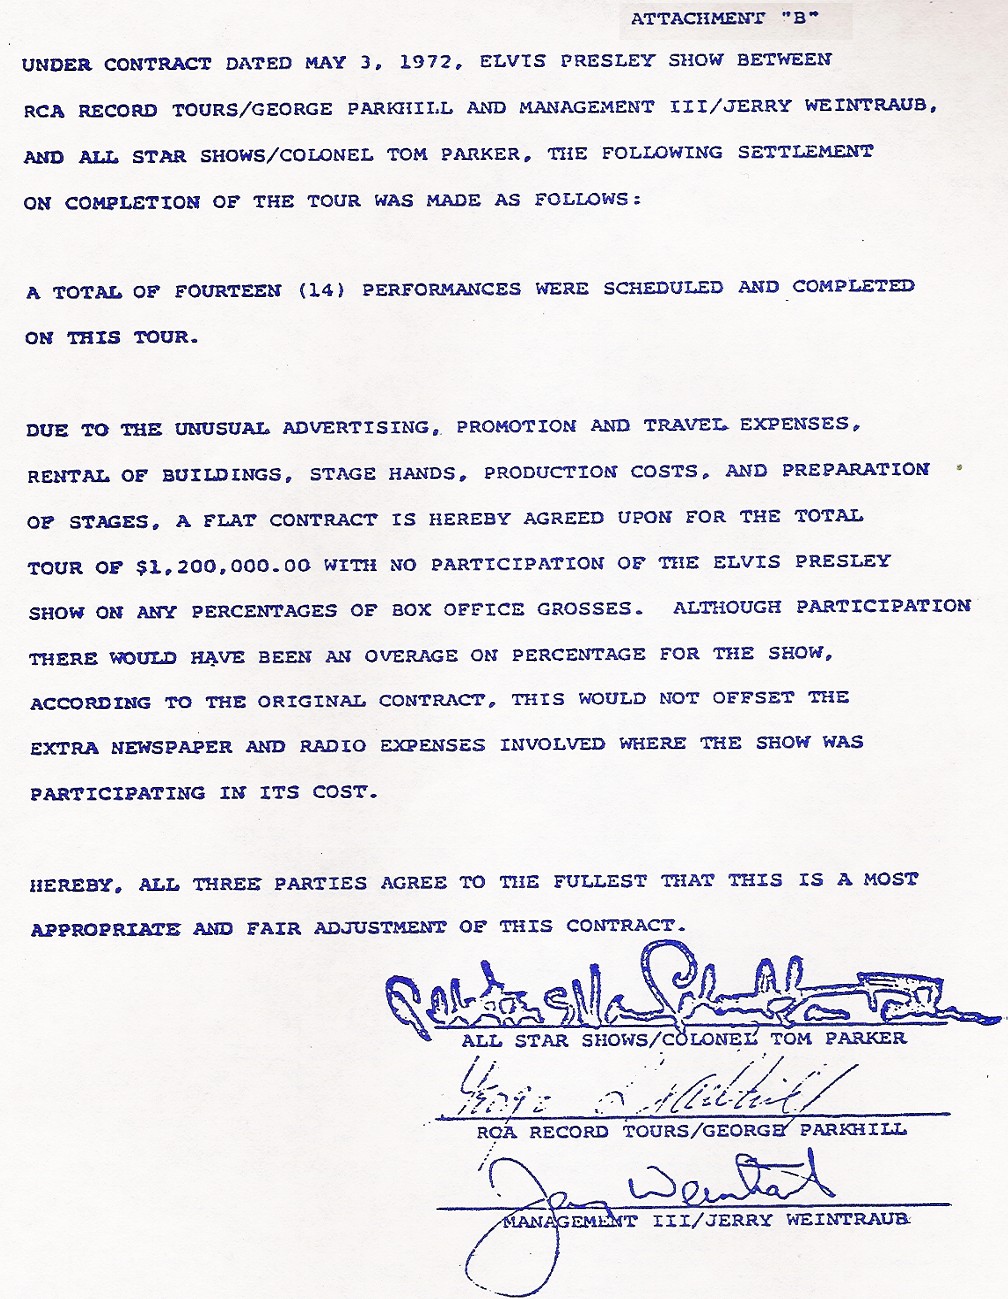 Elvis Madison Square Garden Contract - Page 7 of 8